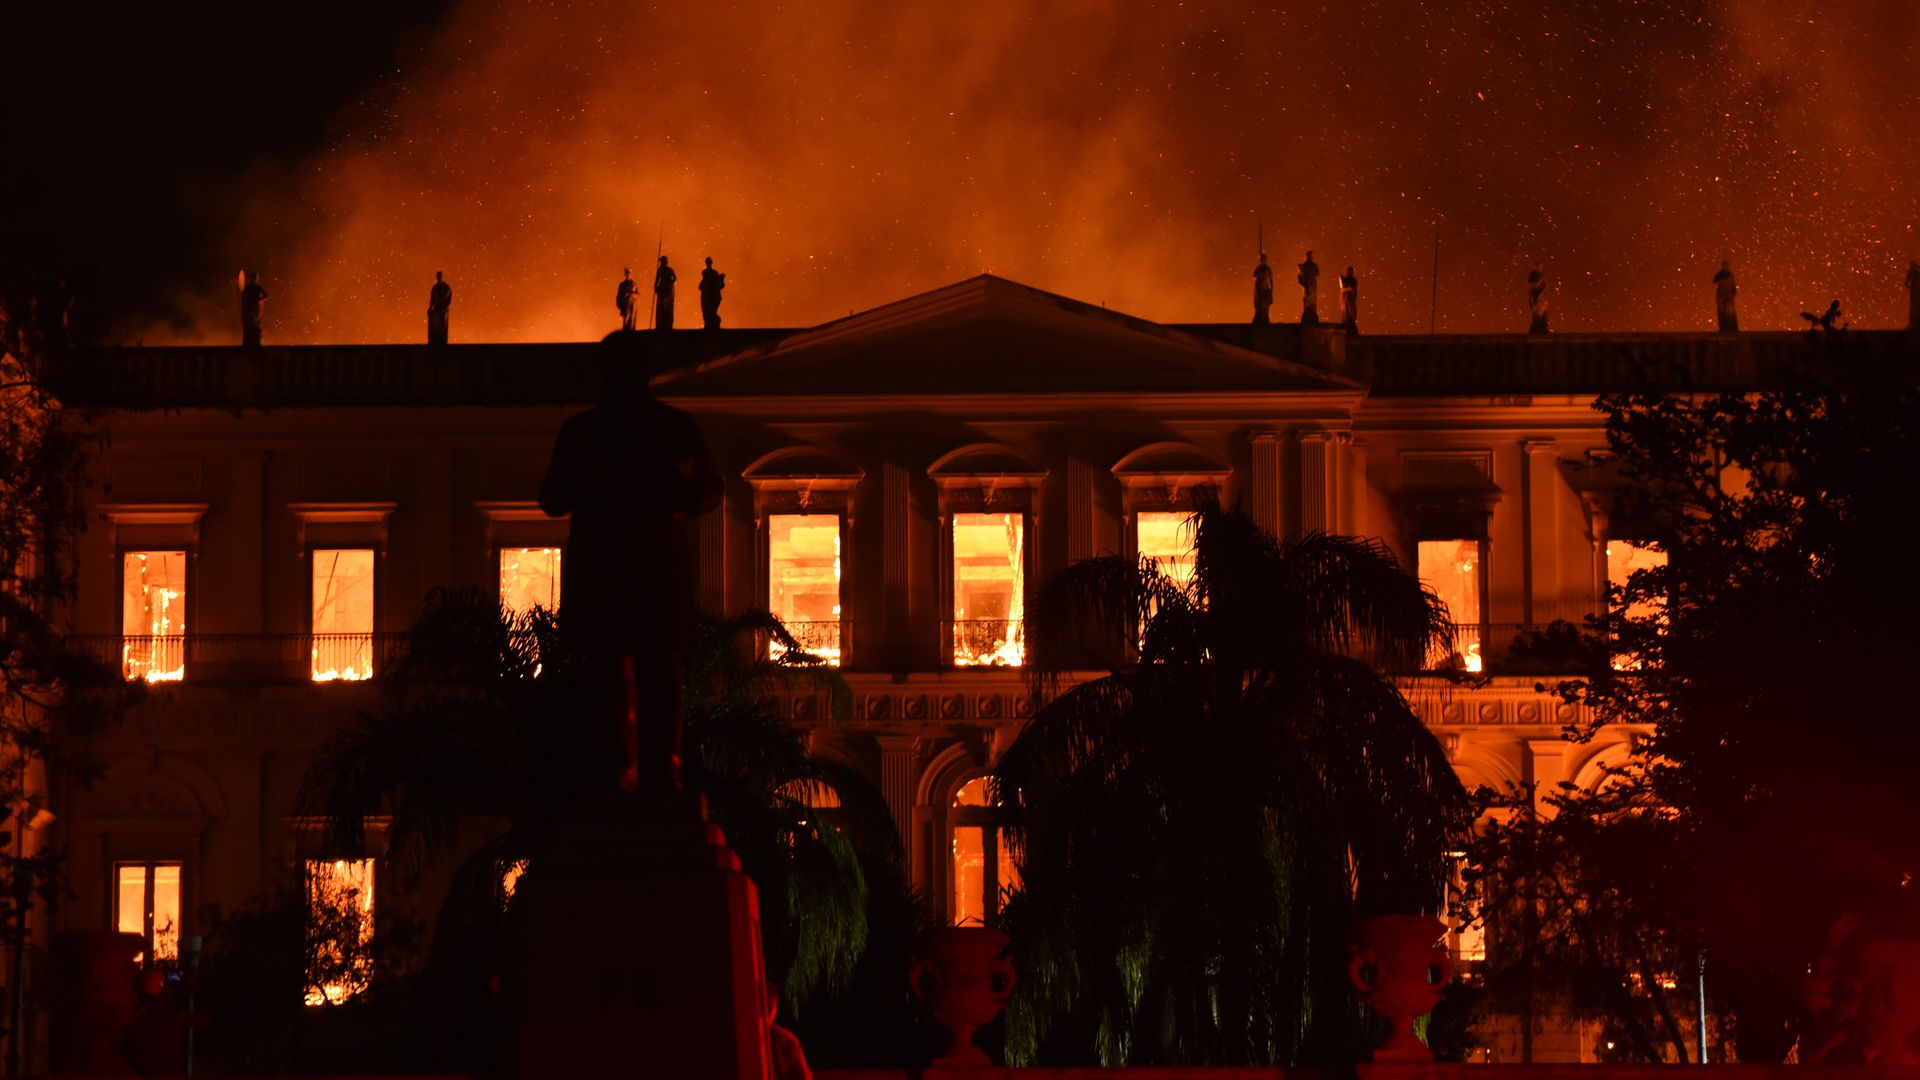 A beautiful museum with sculptures on the top is ablaze. The whole sky looks red and you can see fire through the large windows at the front of the old building. 